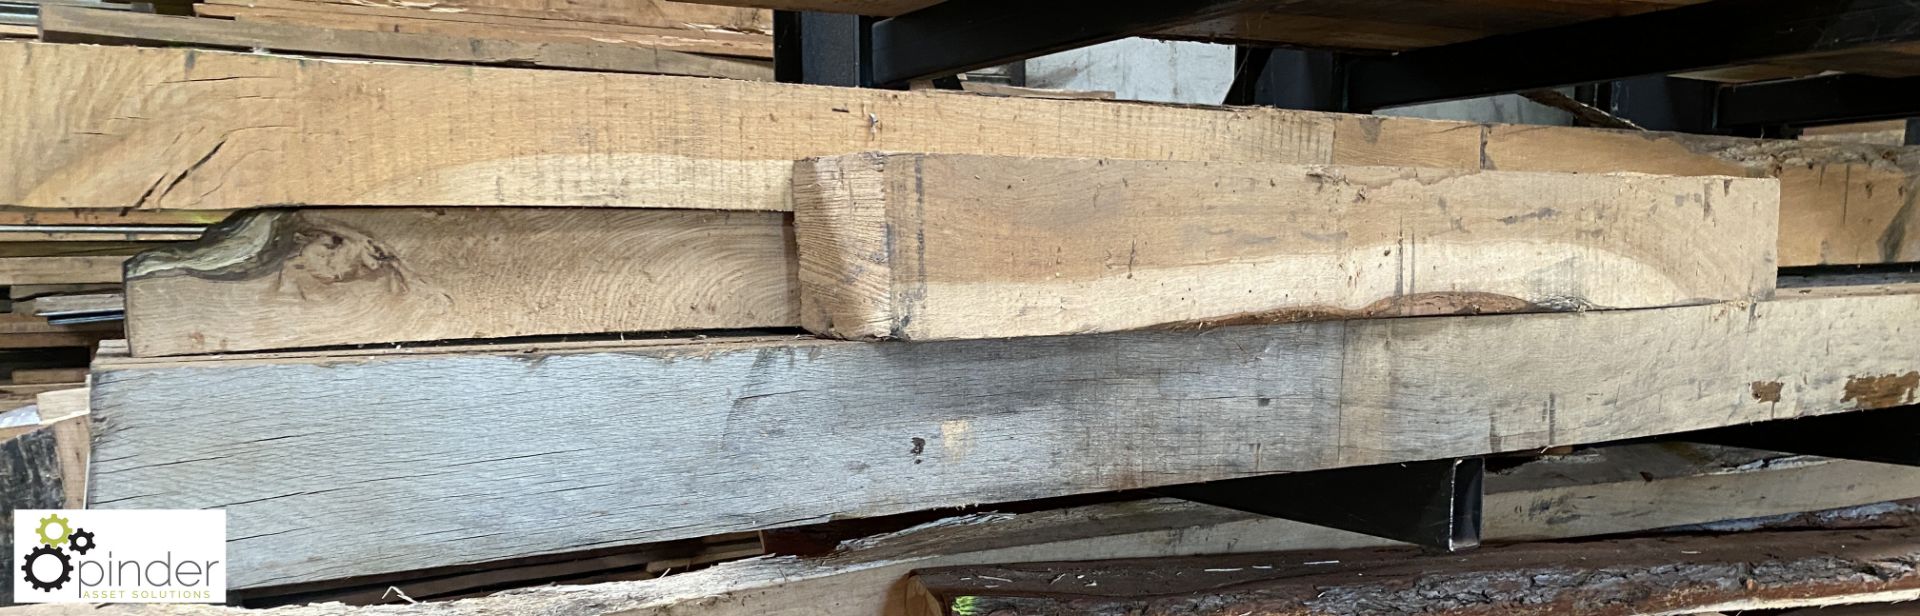 Air dried Oak Beam, 4300mm x 260mm x 150mm, Oak Beam 2460mm x 145mm x 110mm and 3 various Off Cuts - Image 4 of 6